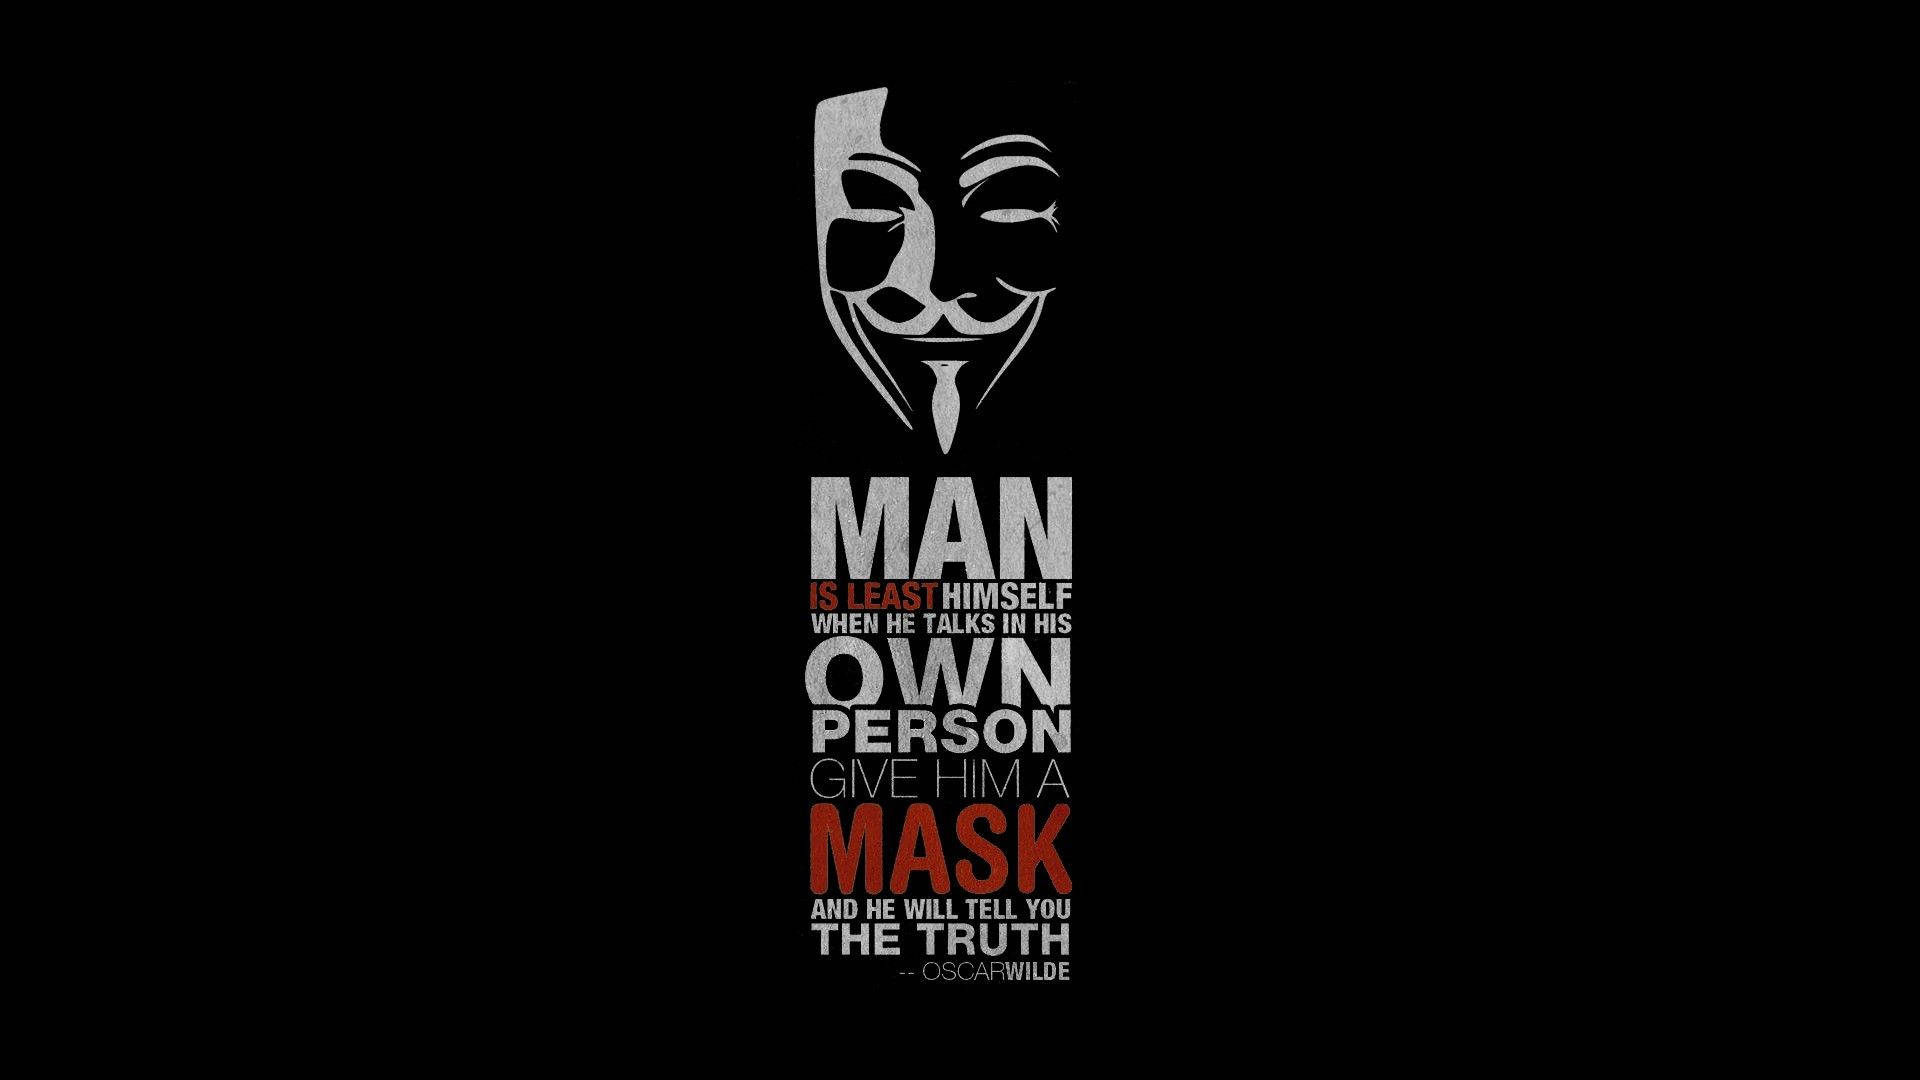 Free Anonymous Wallpaper Downloads, [200+] Anonymous Wallpapers for FREE |  